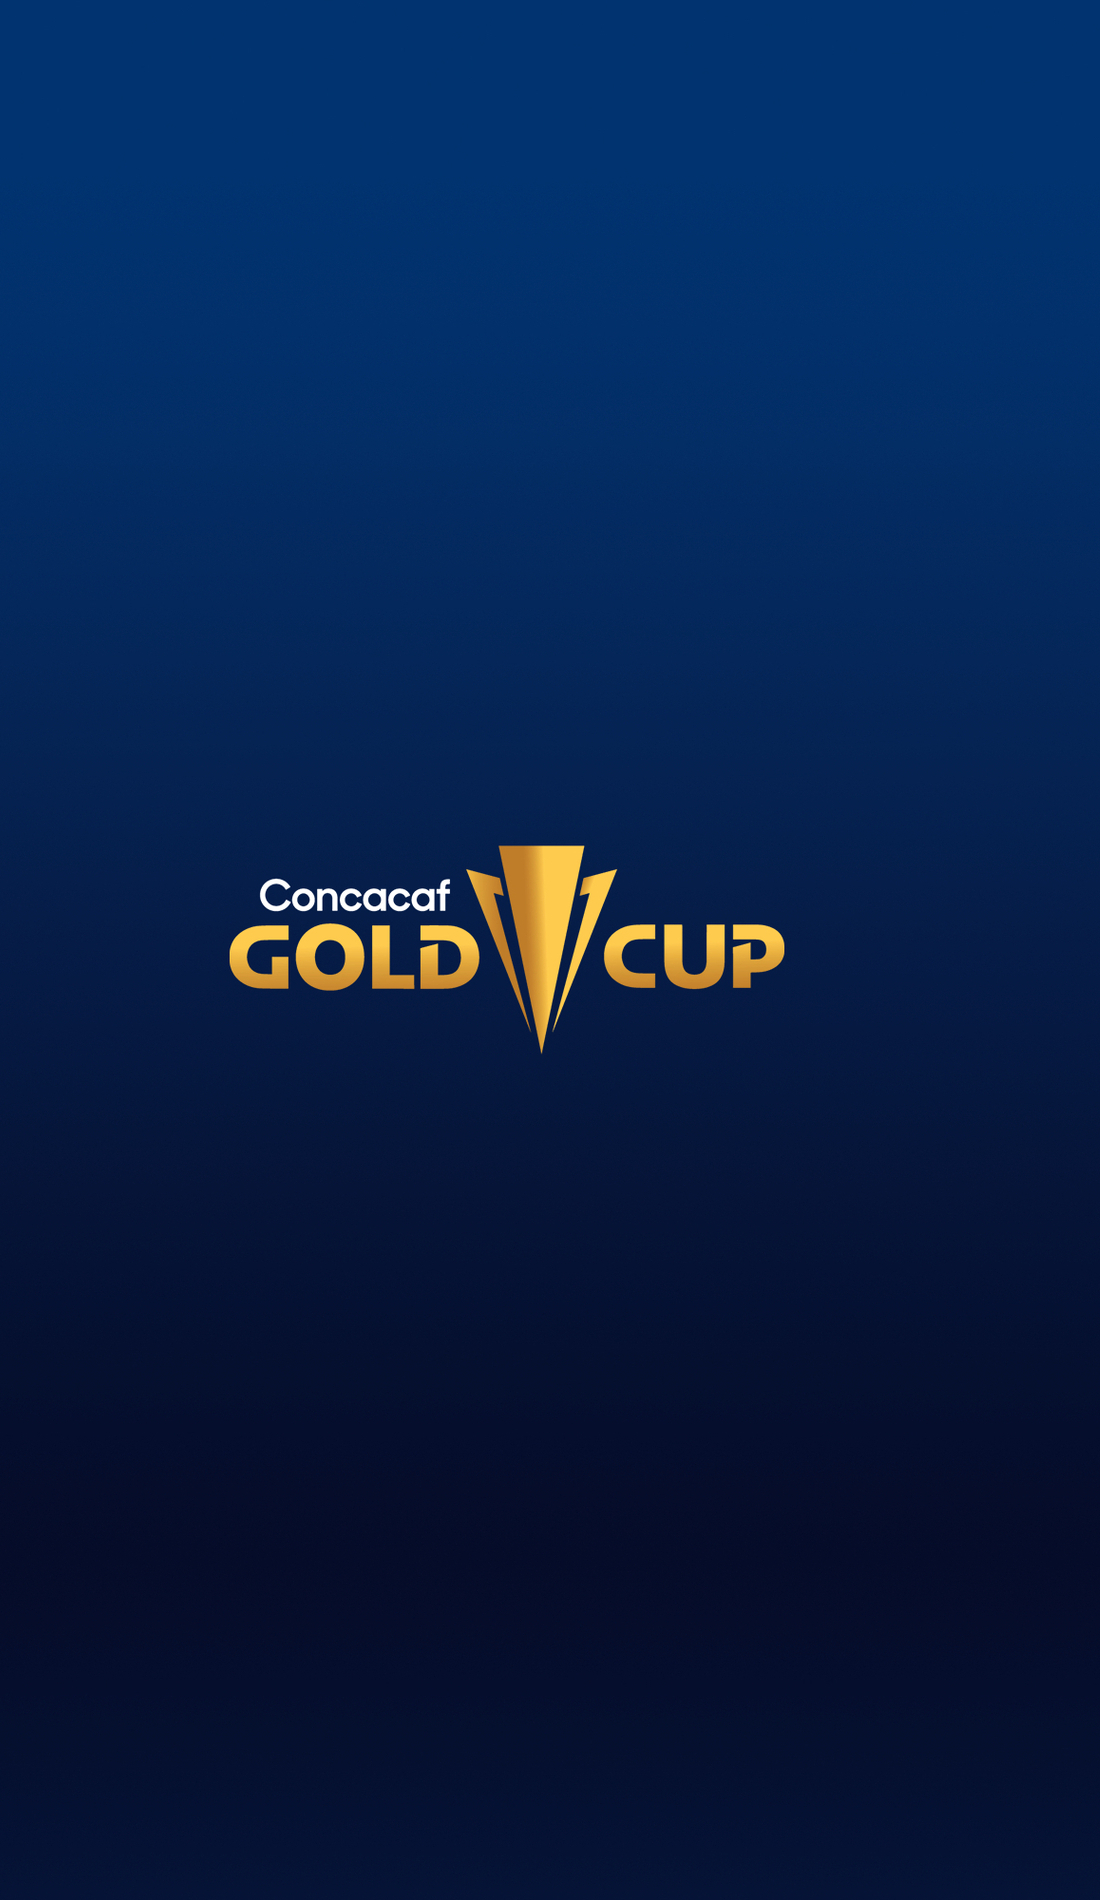 A CONCACAF Gold Cup live event